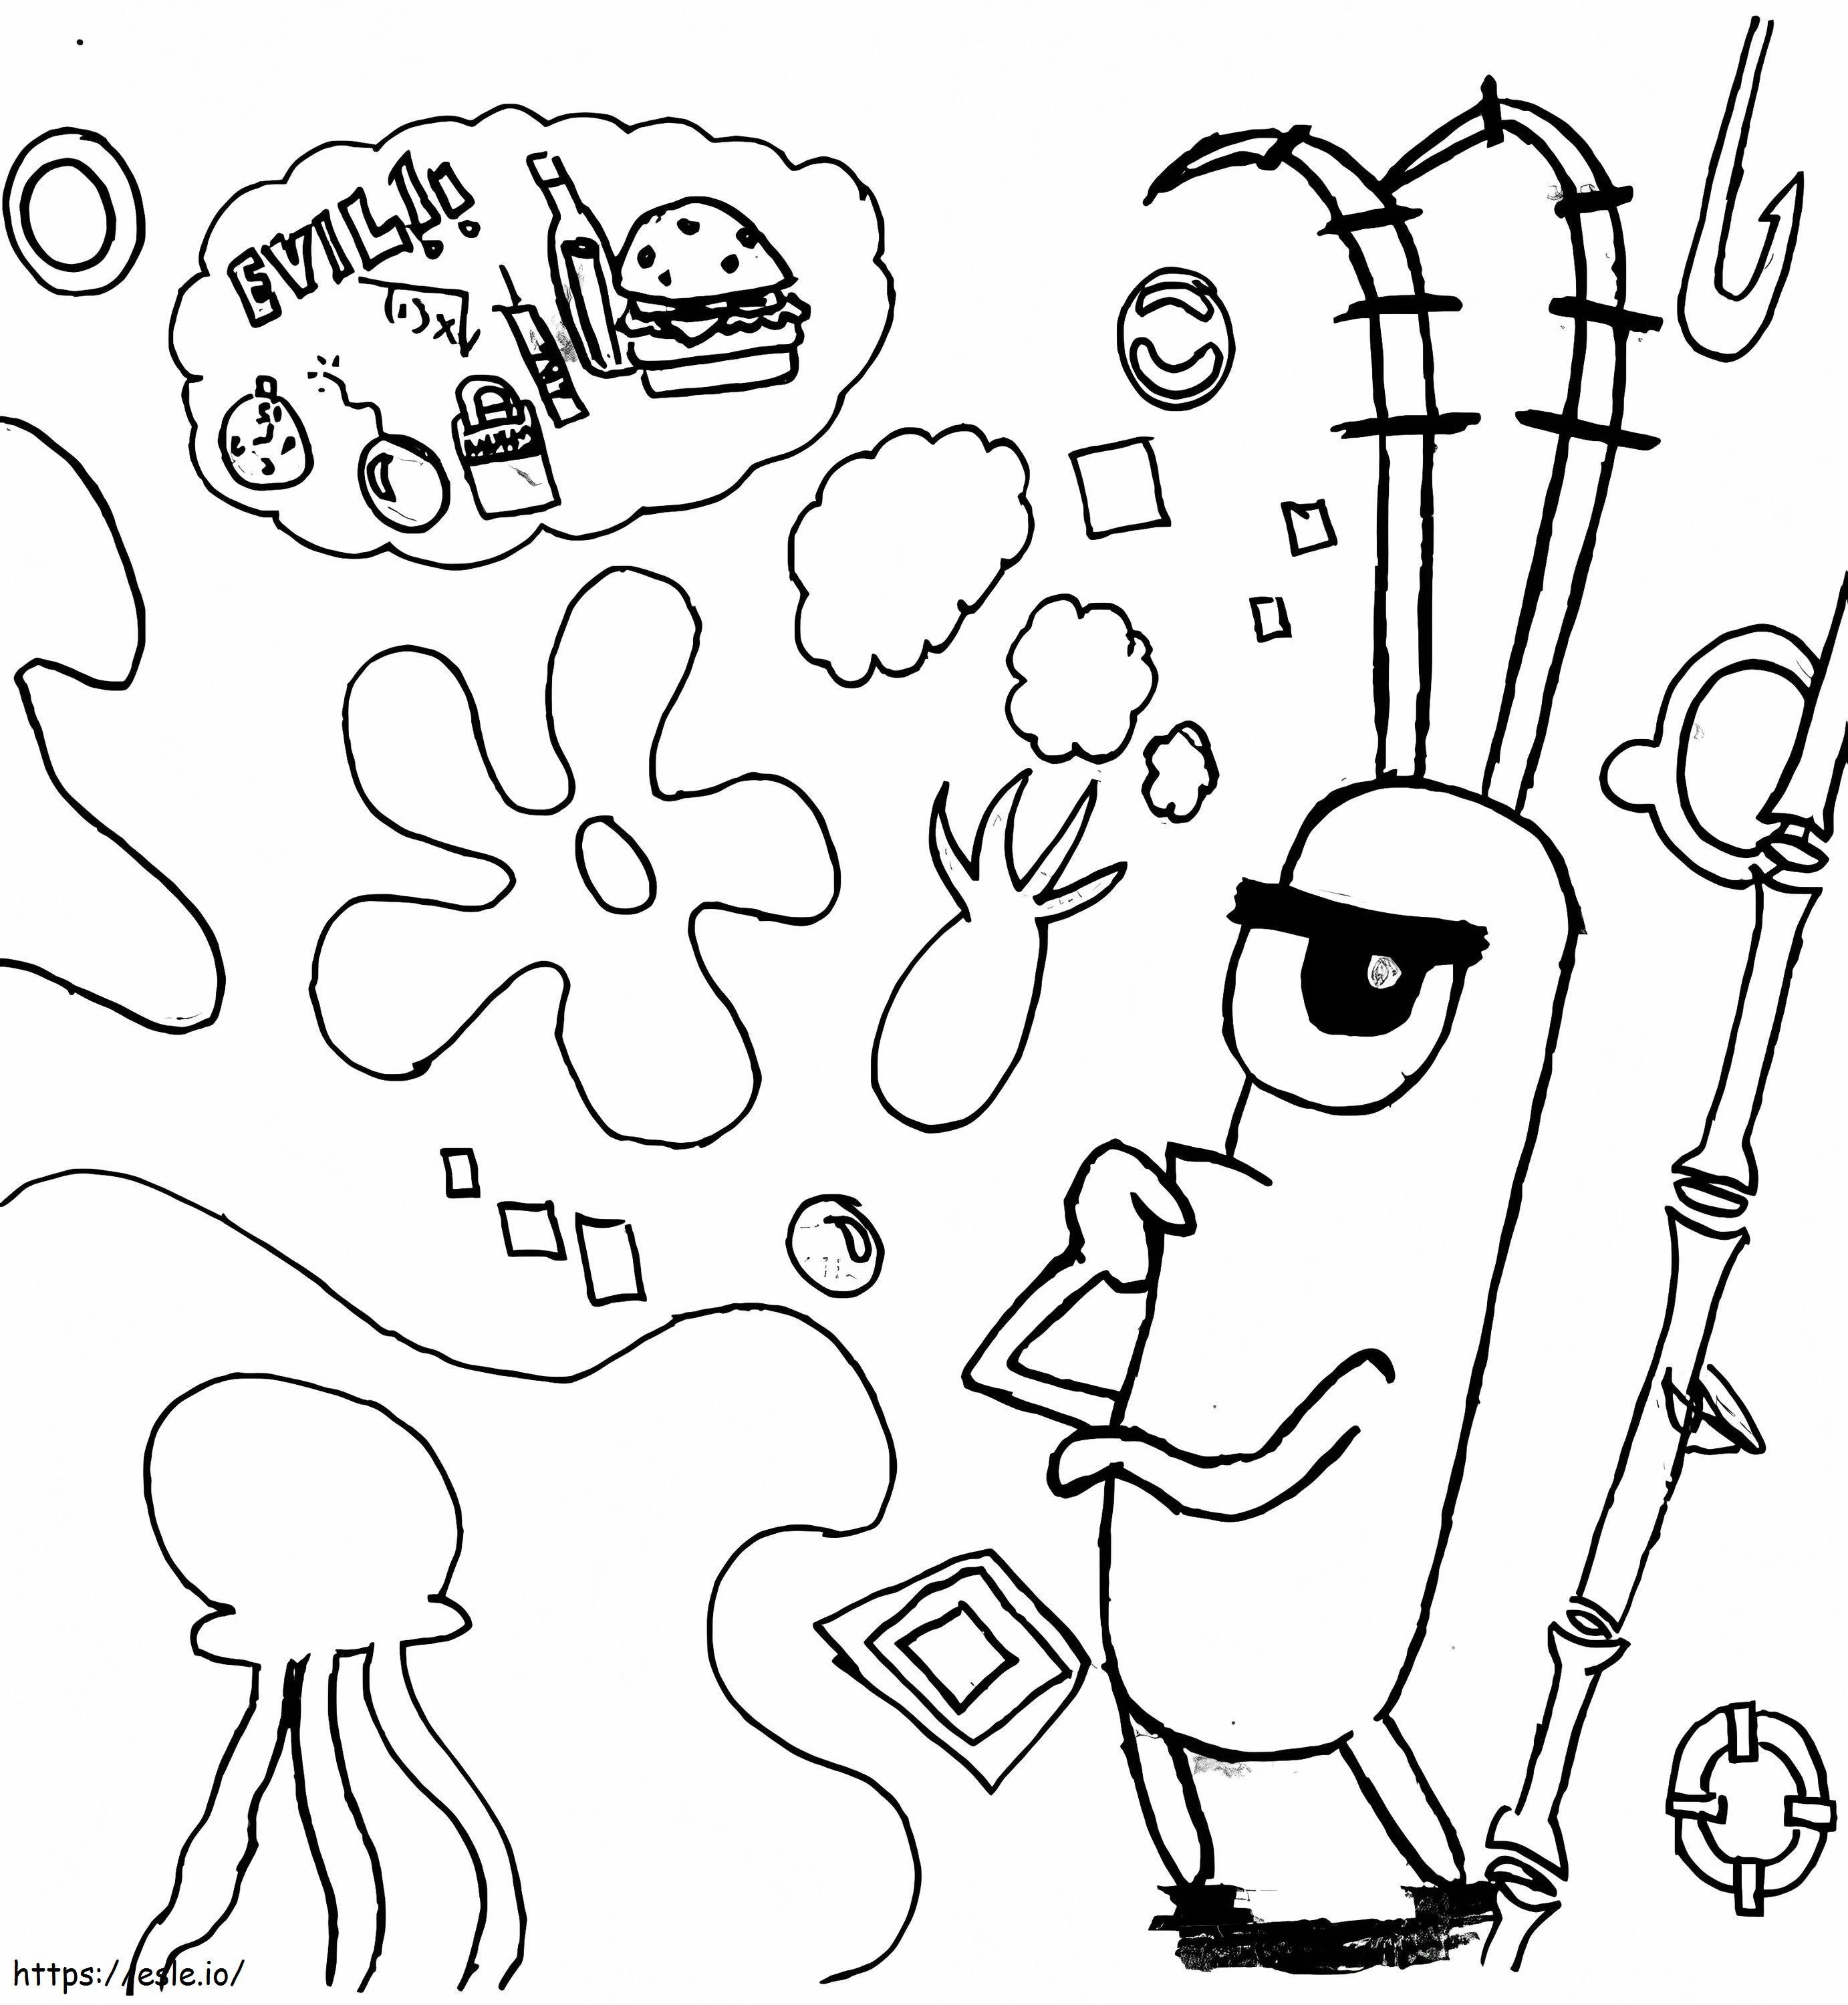 Plankton Is Thinking coloring page